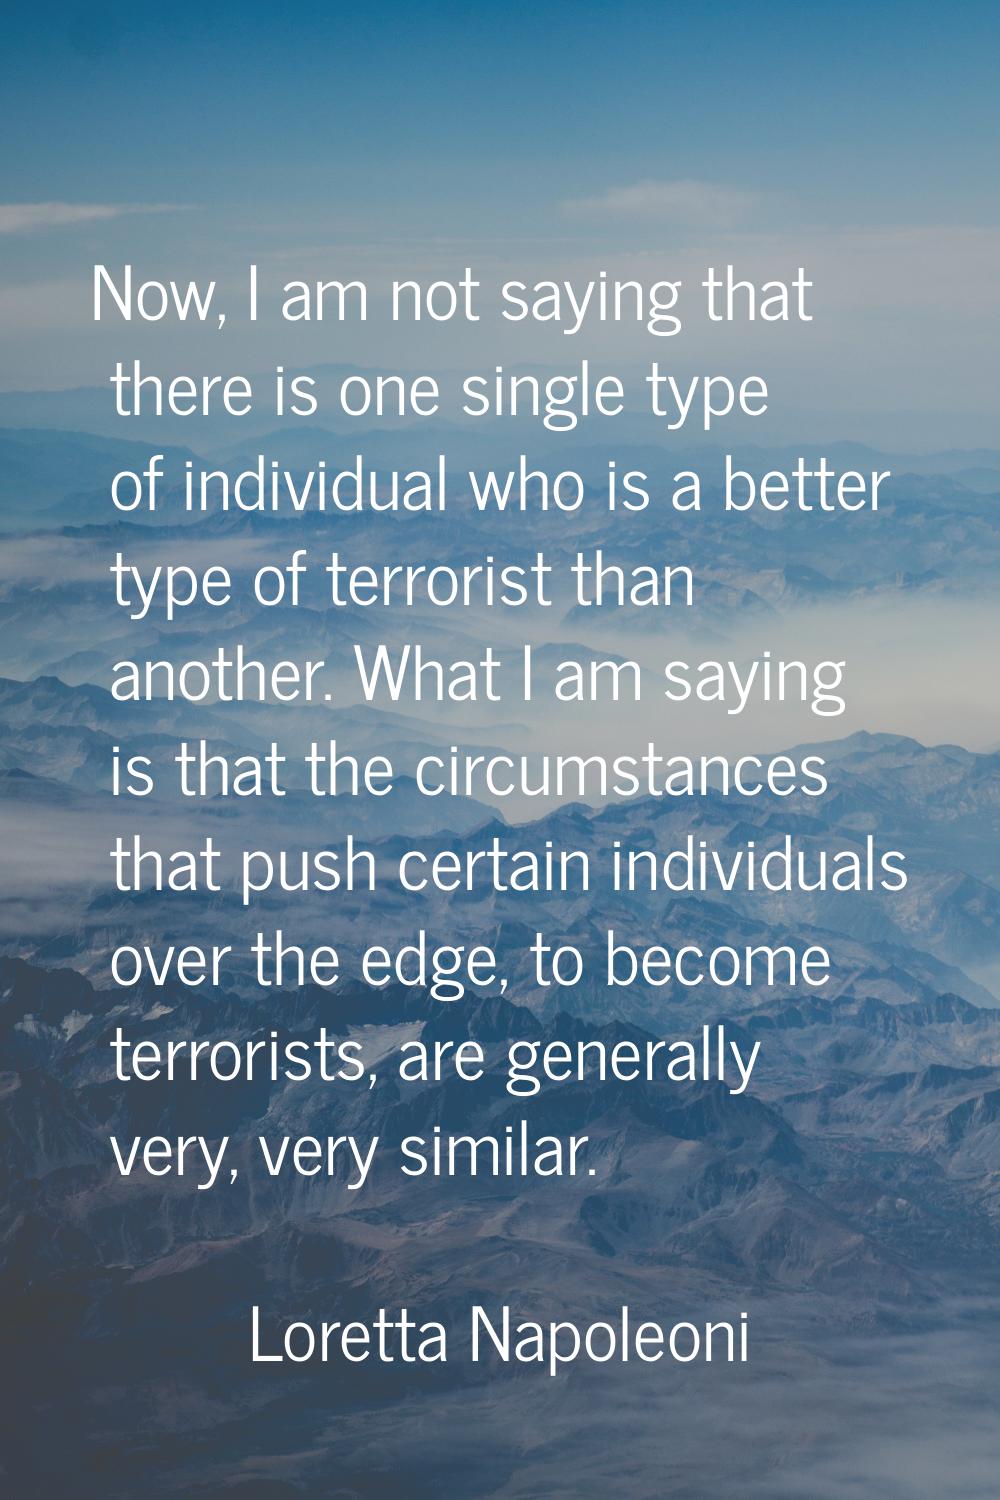 Now, I am not saying that there is one single type of individual who is a better type of terrorist 